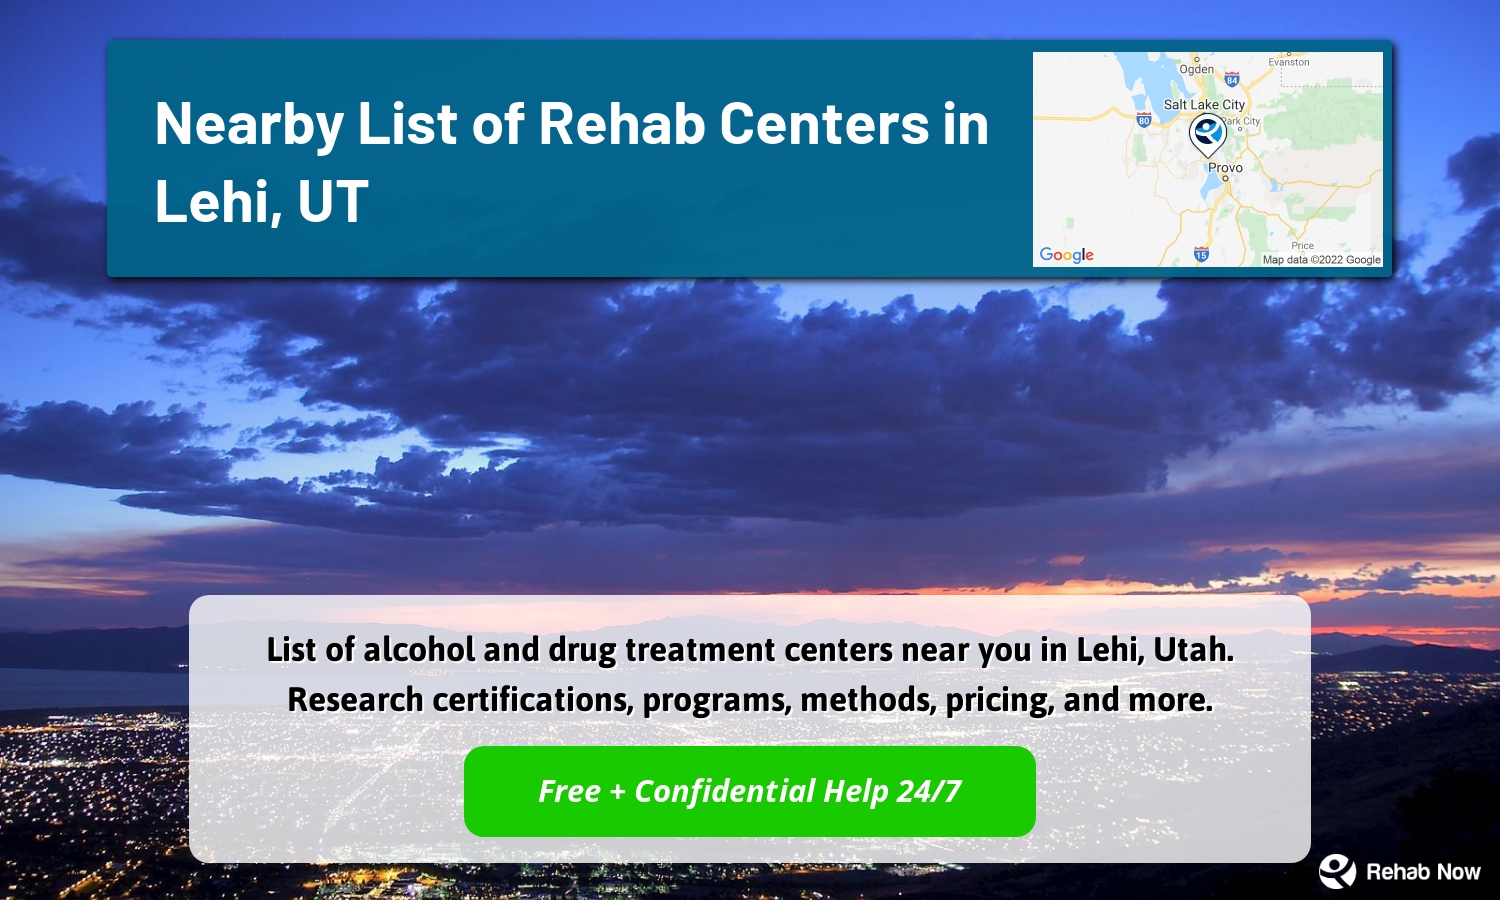 List of alcohol and drug treatment centers near you in Lehi, Utah. Research certifications, programs, methods, pricing, and more.